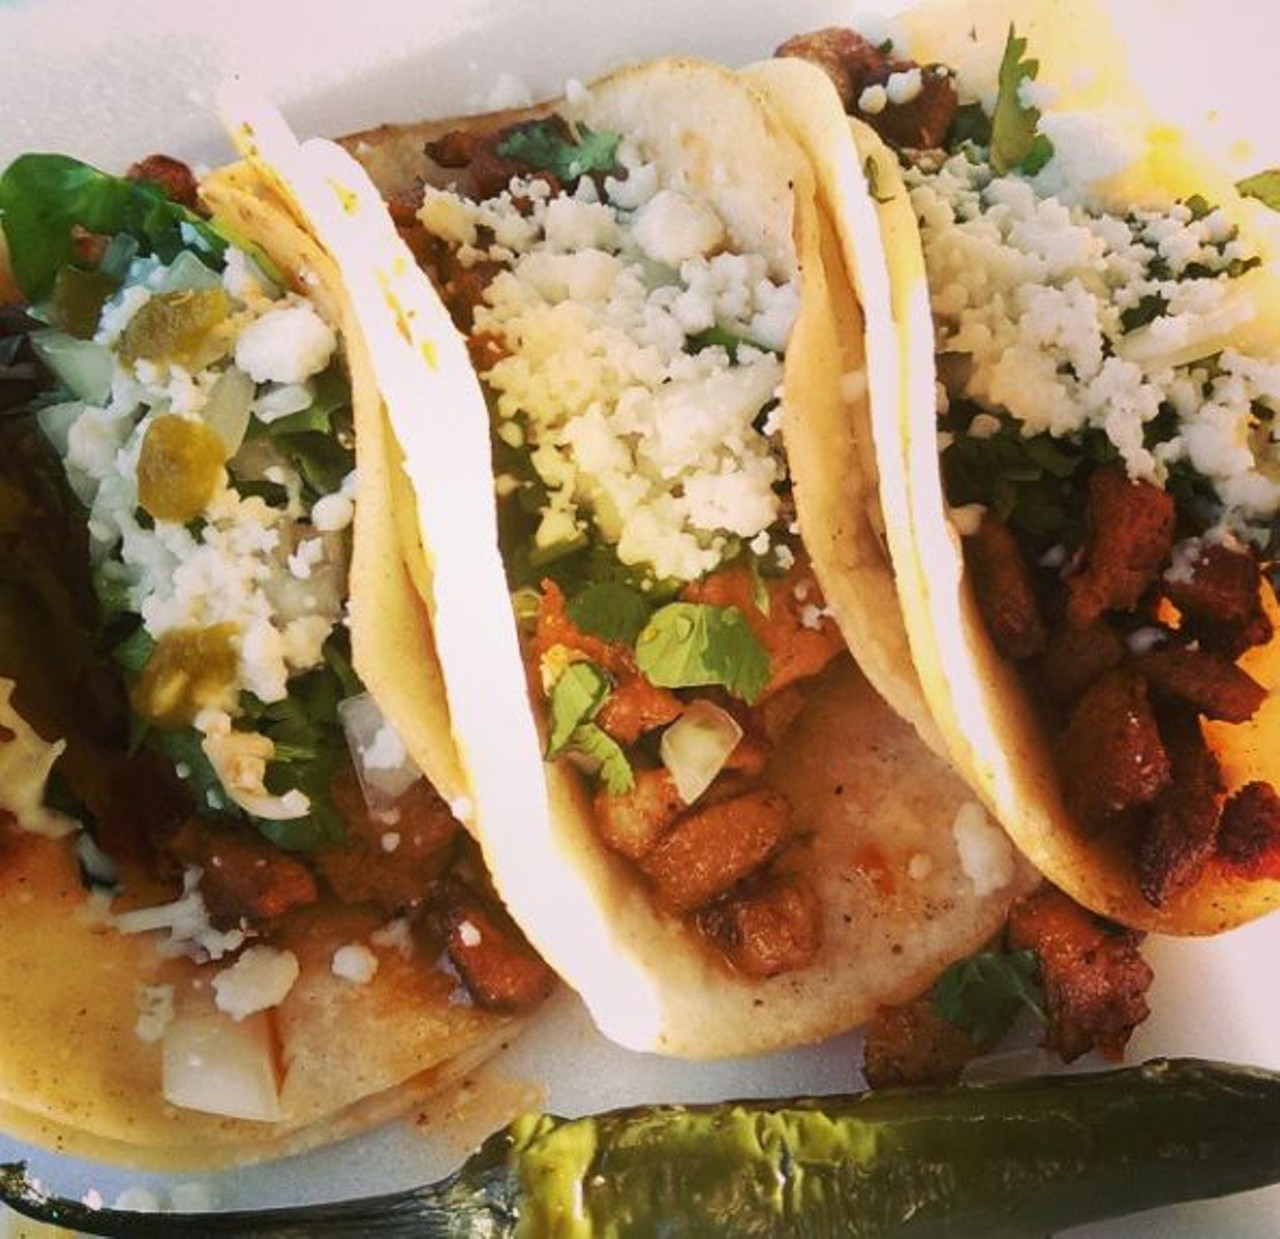 Gordo&#146;s Mini Tacos And Snacks
6613 Lake View Dr., (210) 218-7287
What is a night without your Netflix, your snacks, your mini tacos?
Photo via Instagram, emilymyerly